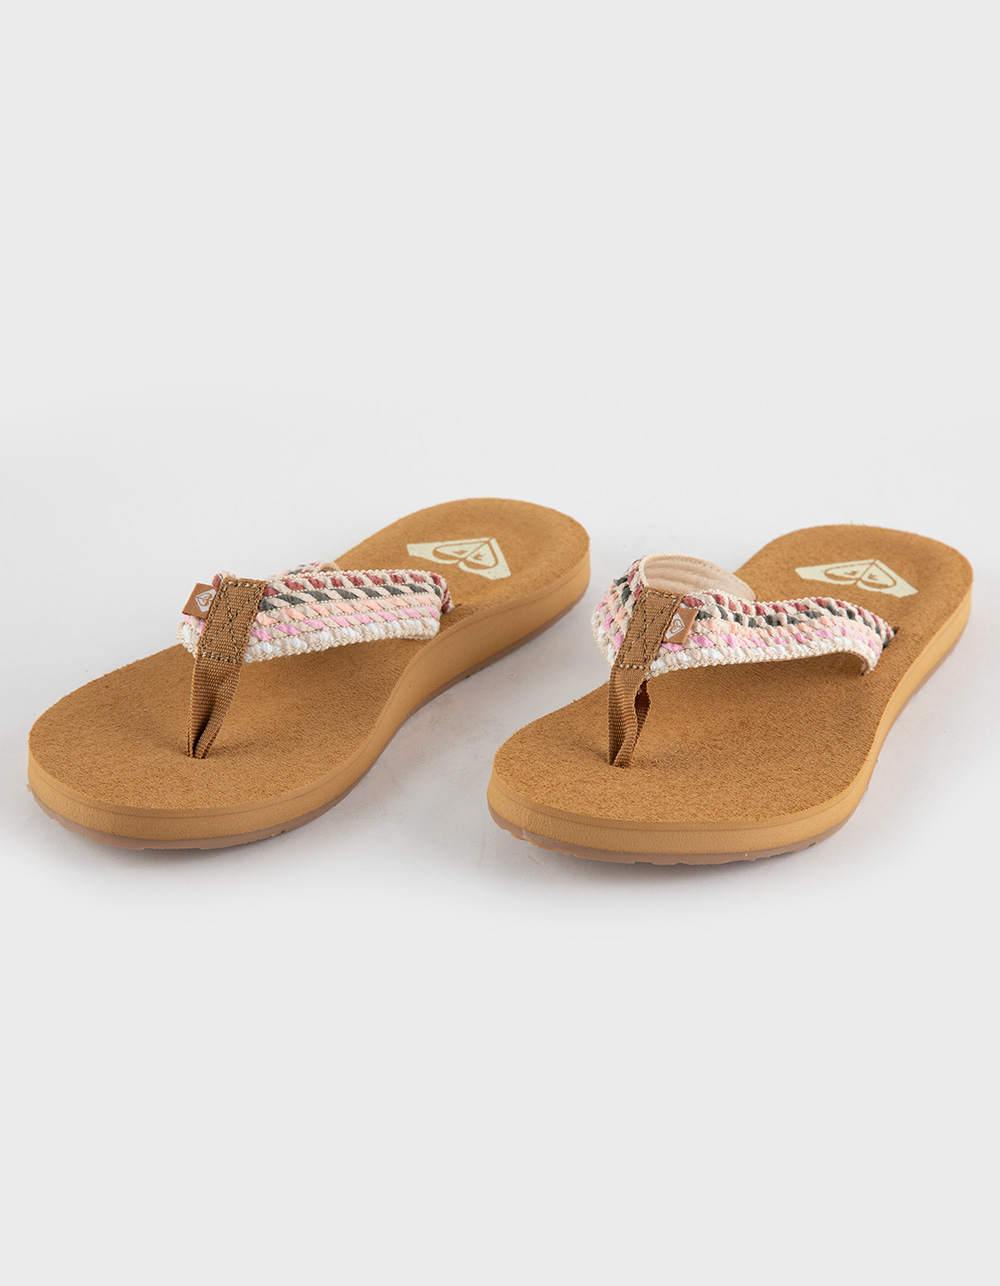 ROXY Porto Rope Womens Thong Sandals - NATURAL